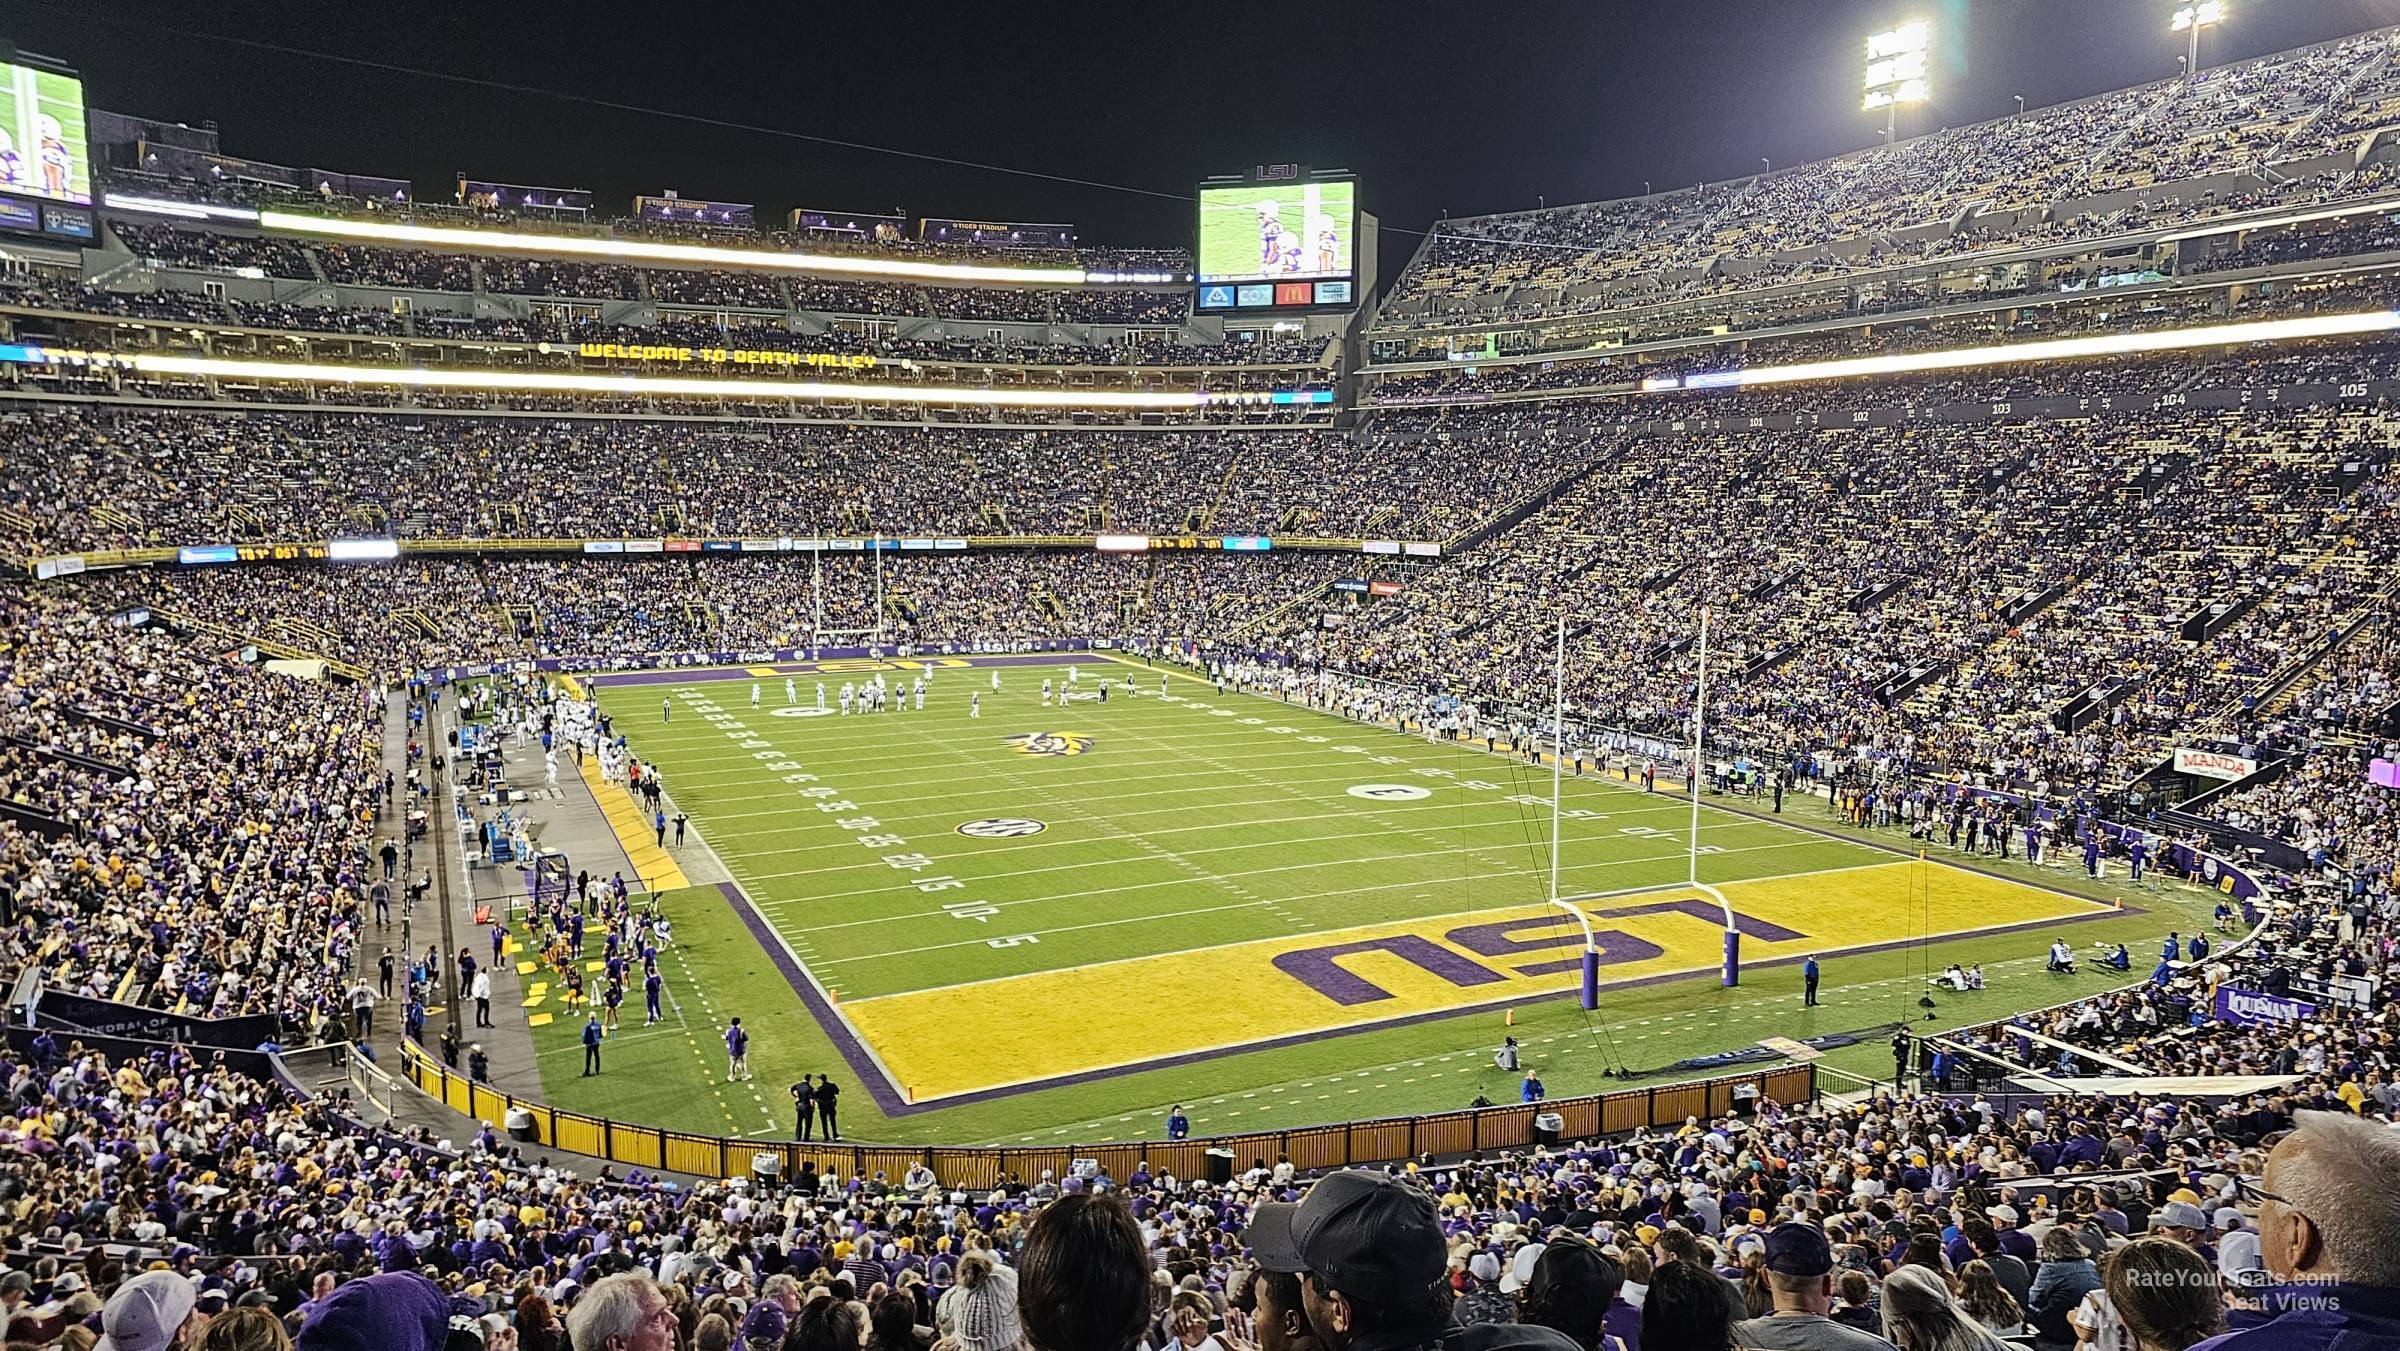 section 237, row 1 seat view  - tiger stadium